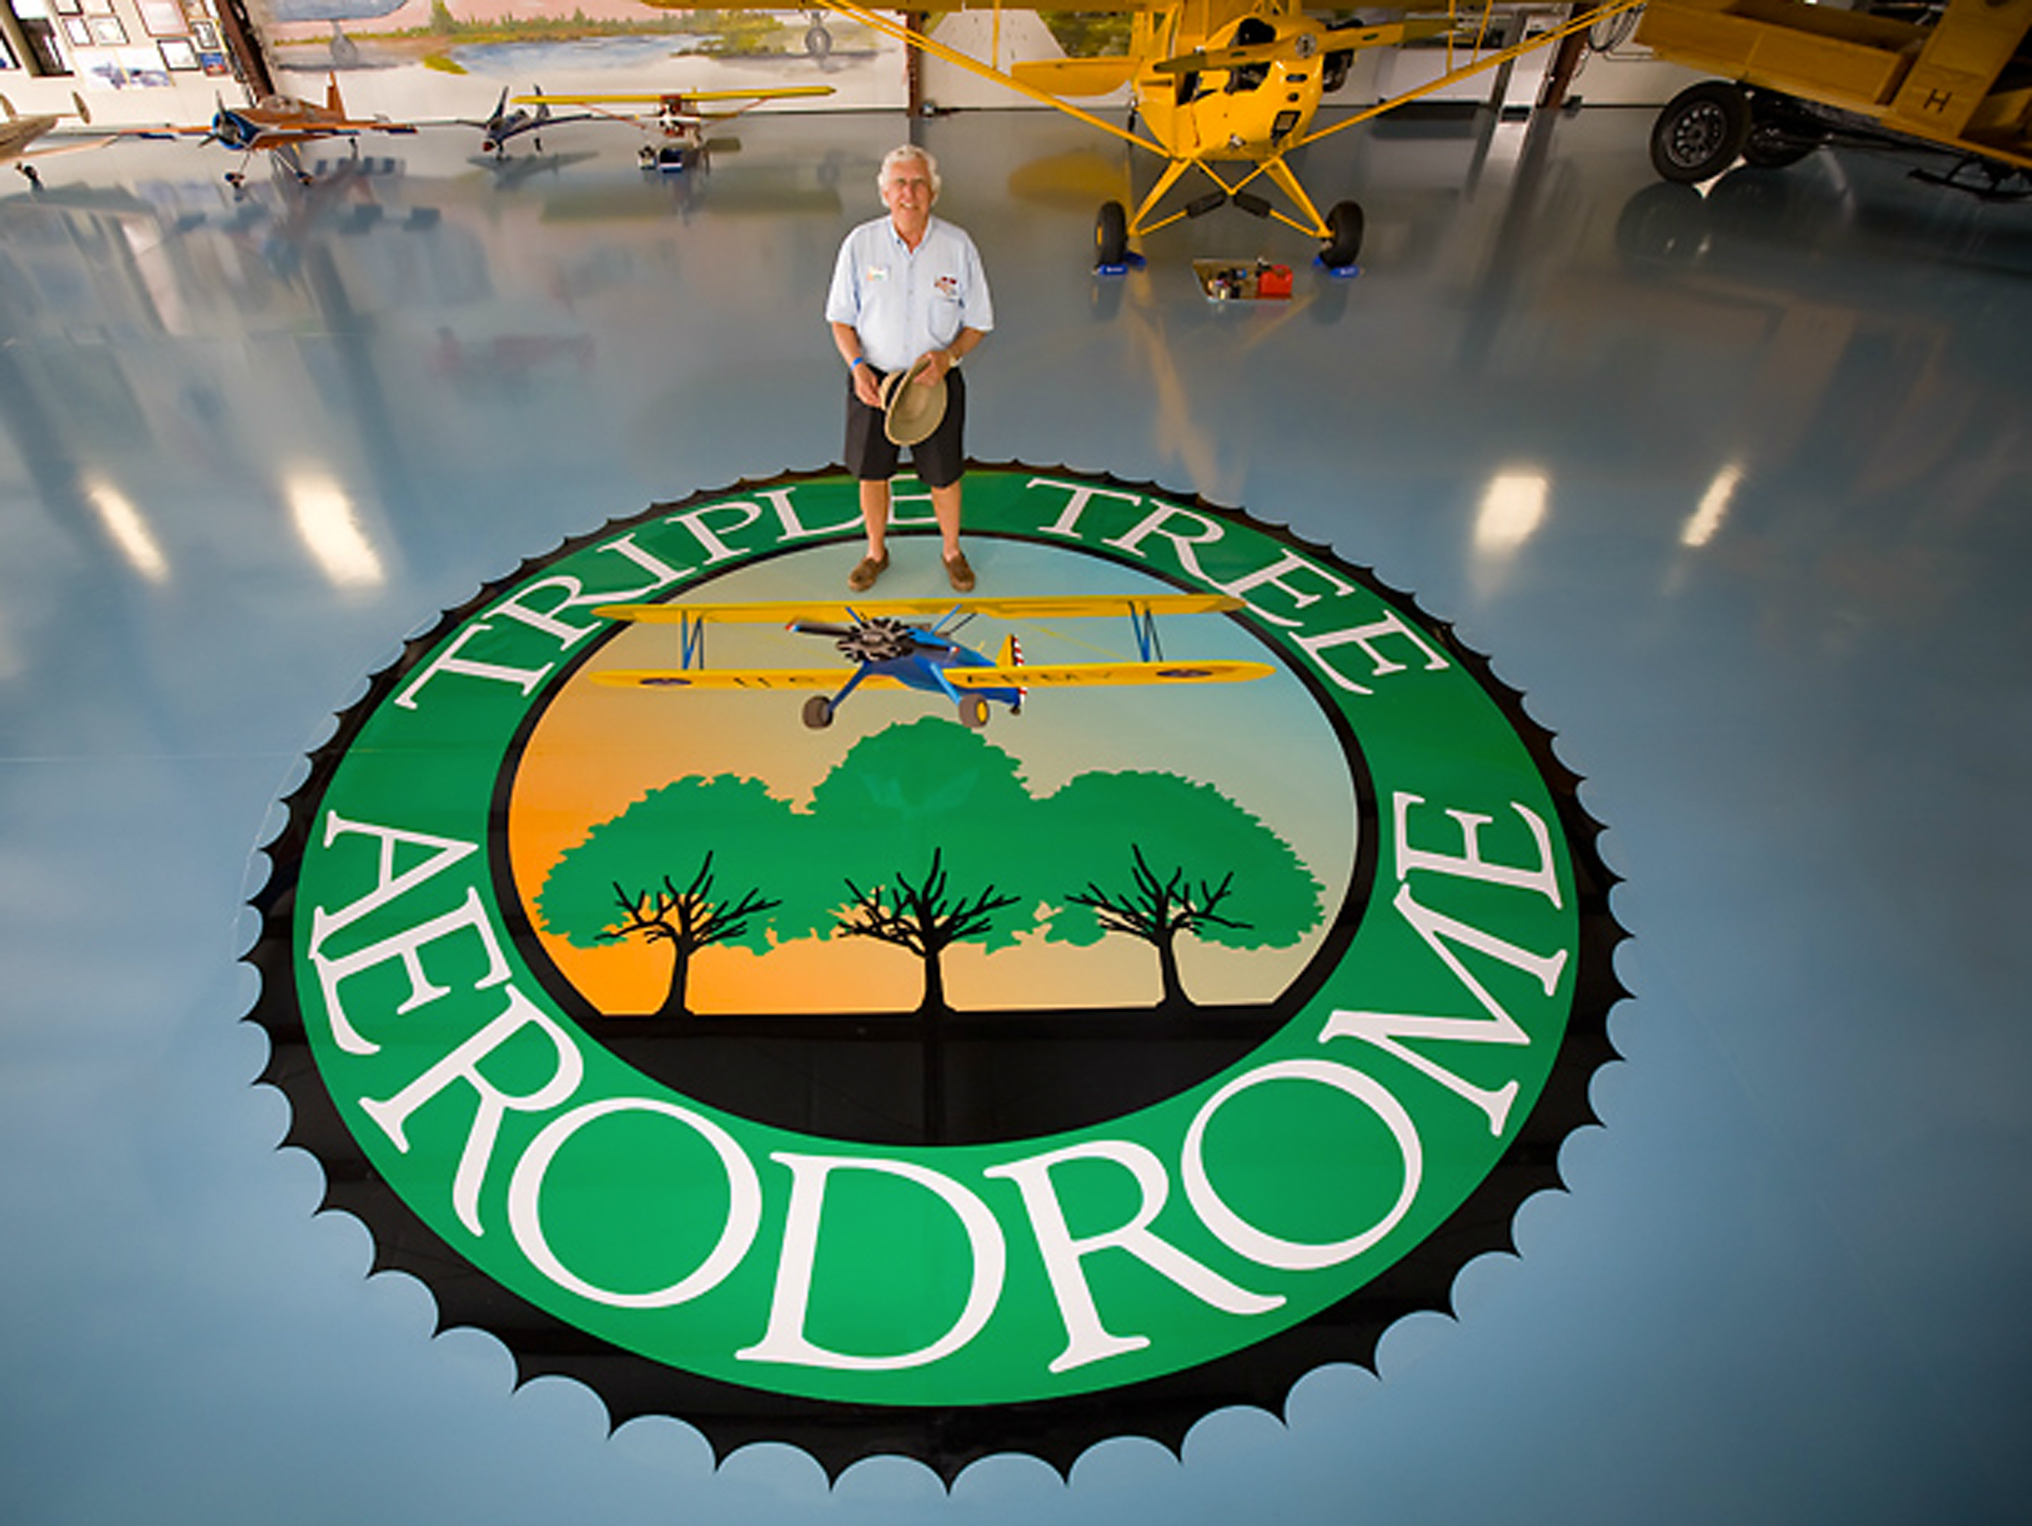 Pat Hartness is standing on the Triple Seal, located in the main hangar where he keeps his restored full-scale airplanes and RC models.